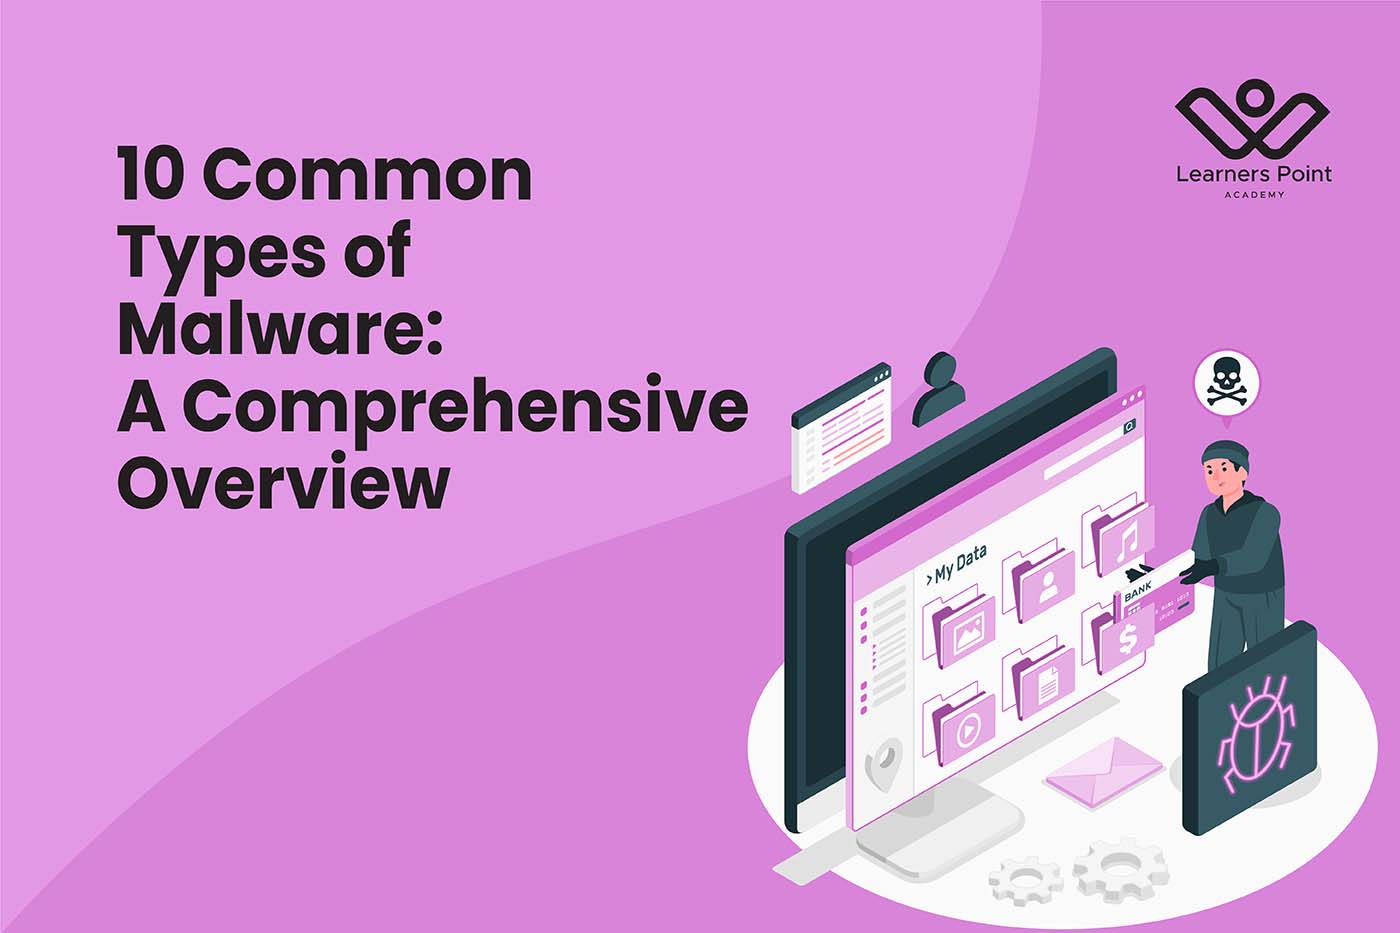 10 Common Types of Malware: A Comprehensive Overview